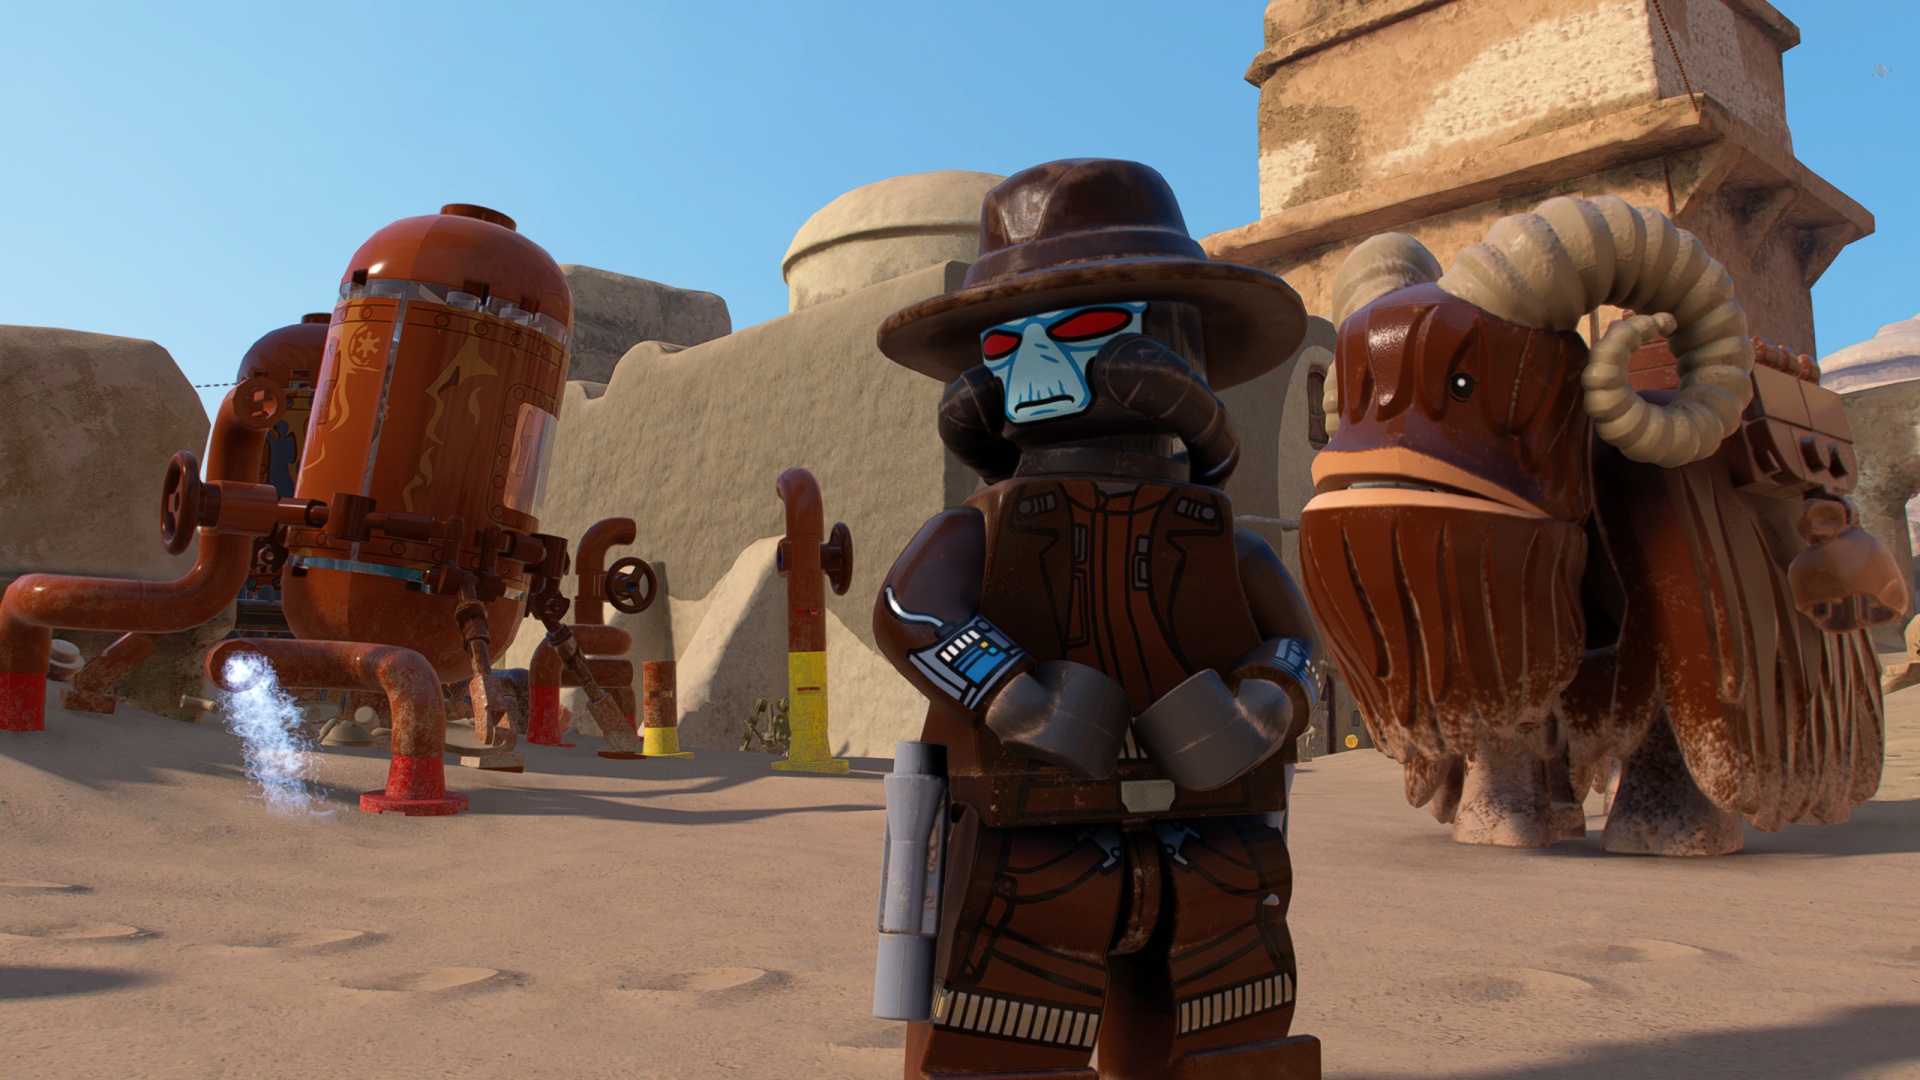 A Lego minifigure version of Cad Bane stands on the streets of a Tatooine city with a Lego Bantha and a building behind him in a screenshot from Lego Star Wars: The Skywalker Saga.